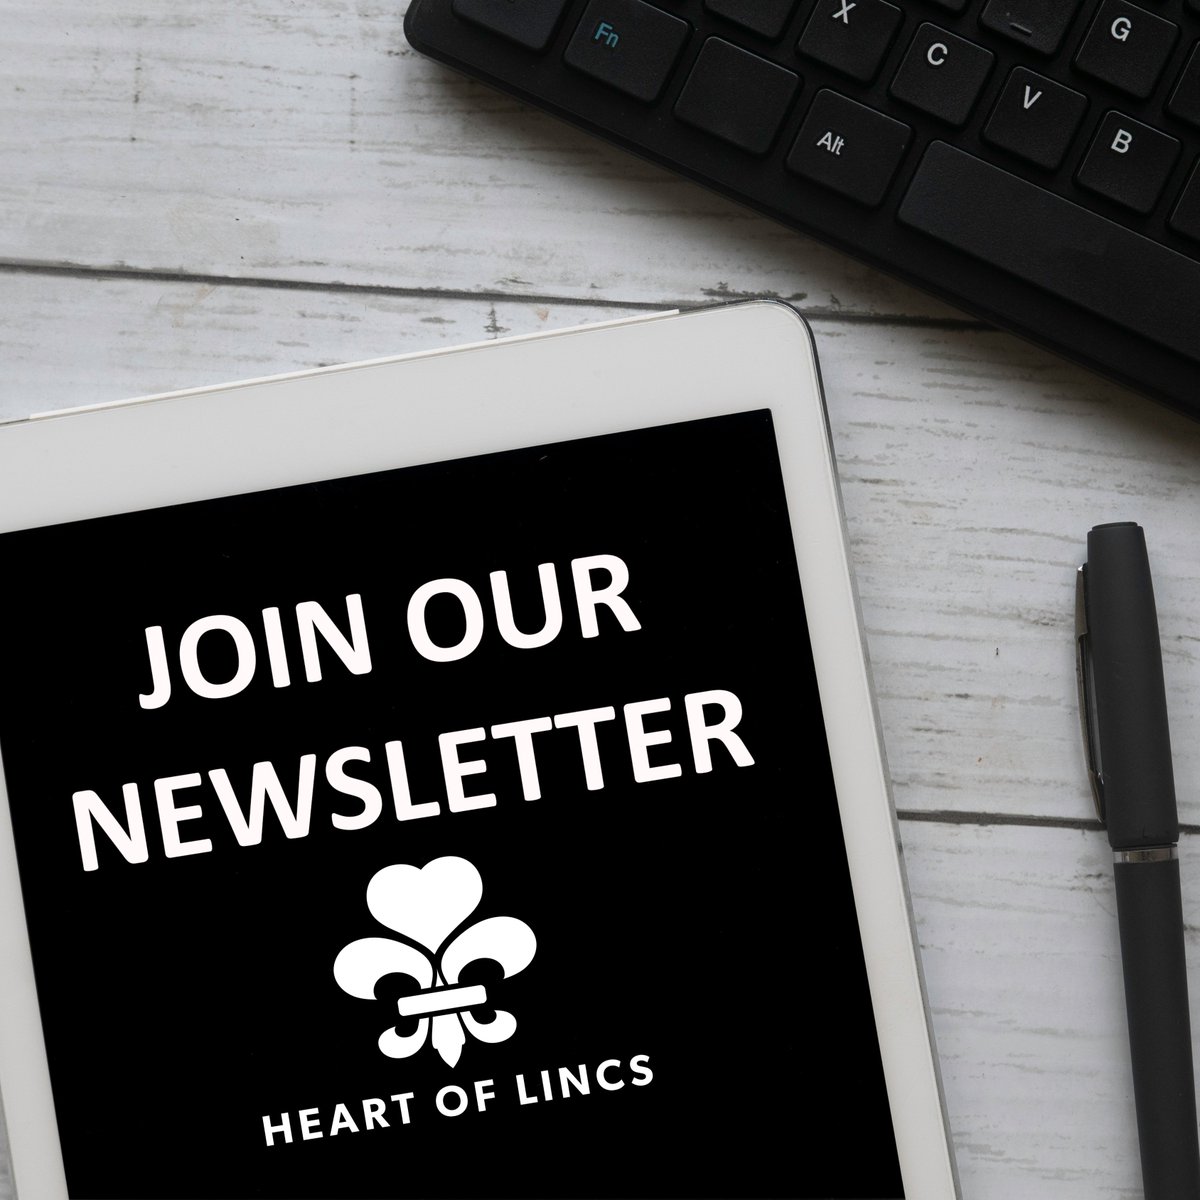 Missed our latest newsletter? Catch up on the latest happenings in the Heart of Lincs & discover exciting events, hidden gems & stories from our vibrant district. 💌 Stay in the loop and subscribe for monthly updates delivered straight to your inbox: heartoflincs.com/welcome-to-the…